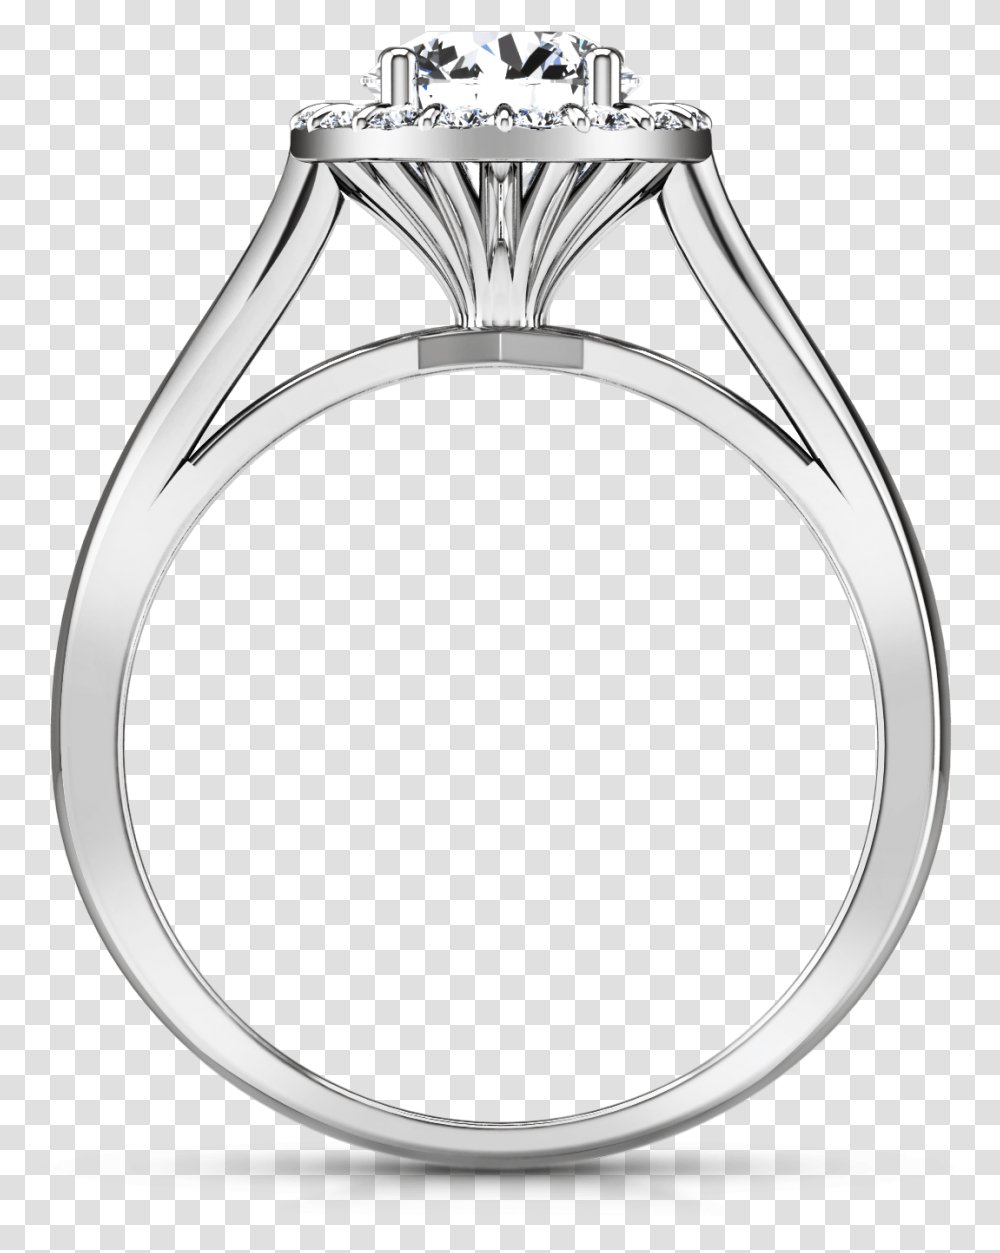 Engagement Ring, Accessories, Accessory, Jewelry, Platinum Transparent Png